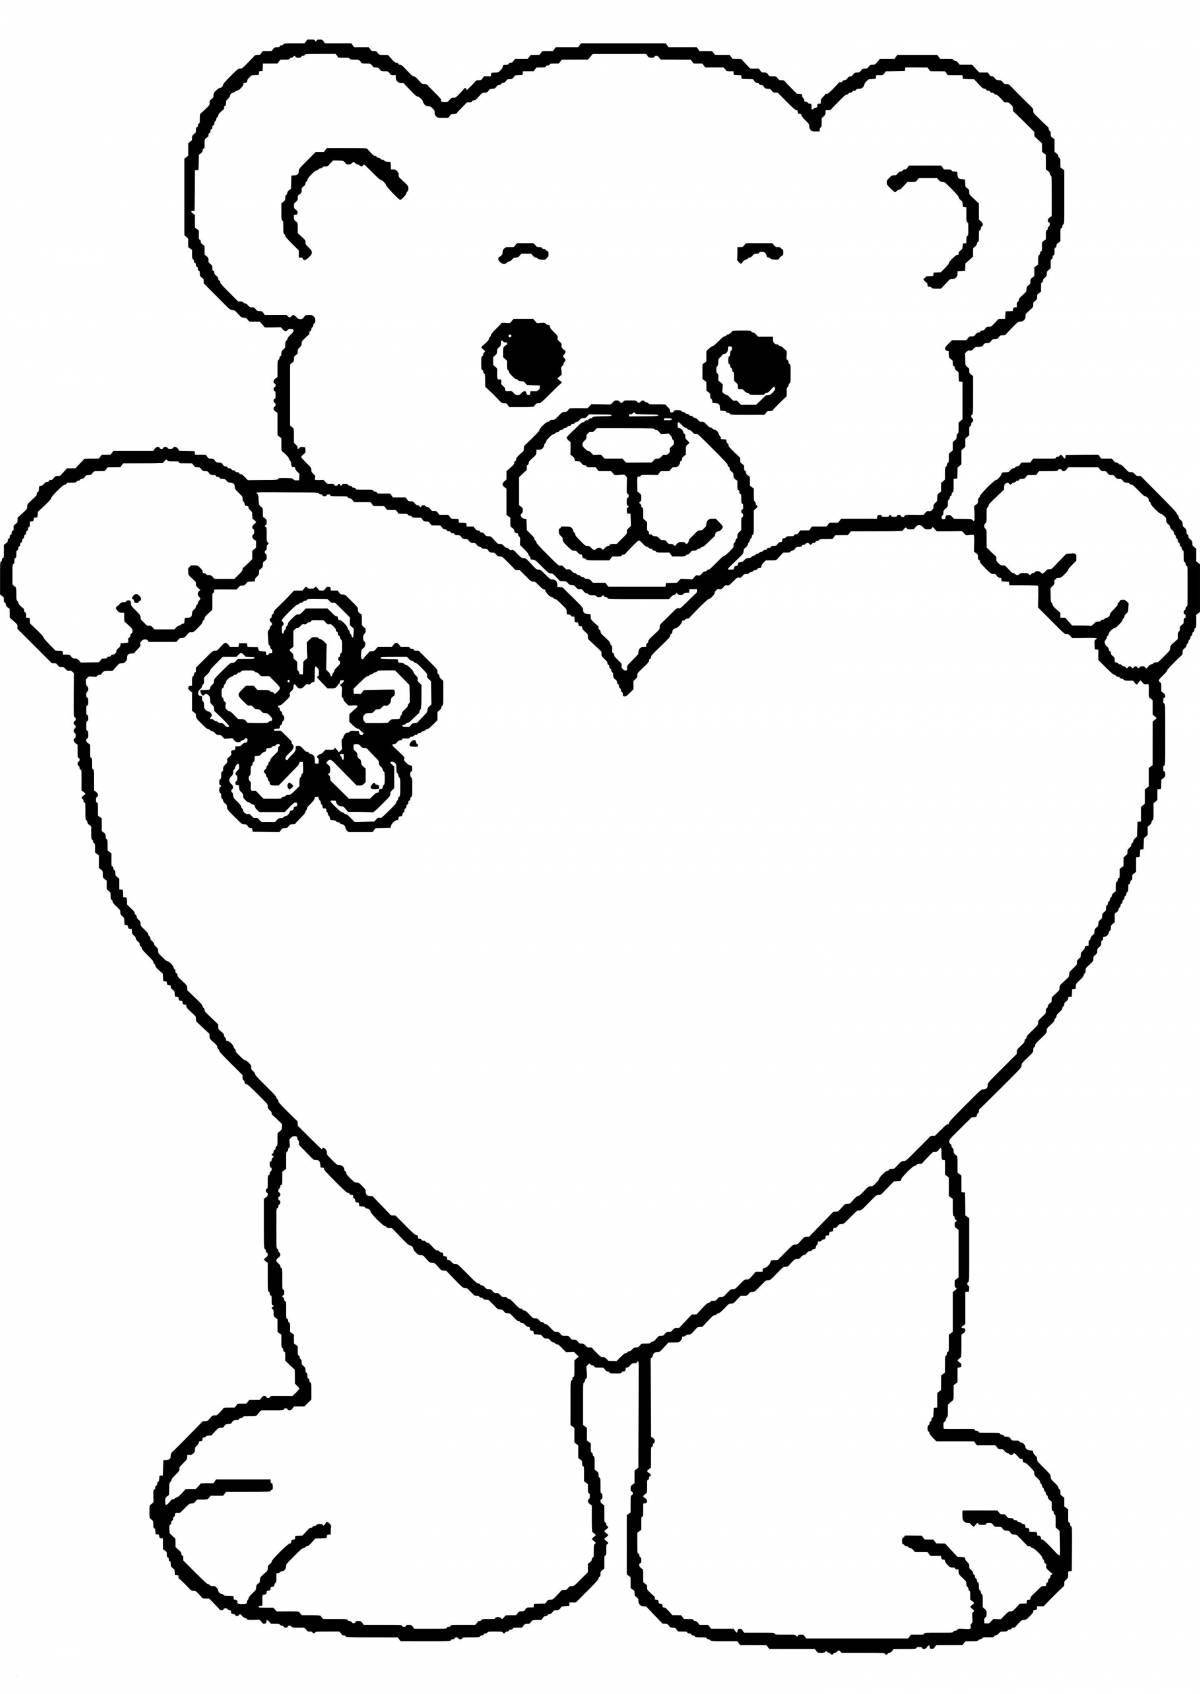 Live bear with a heart coloring book